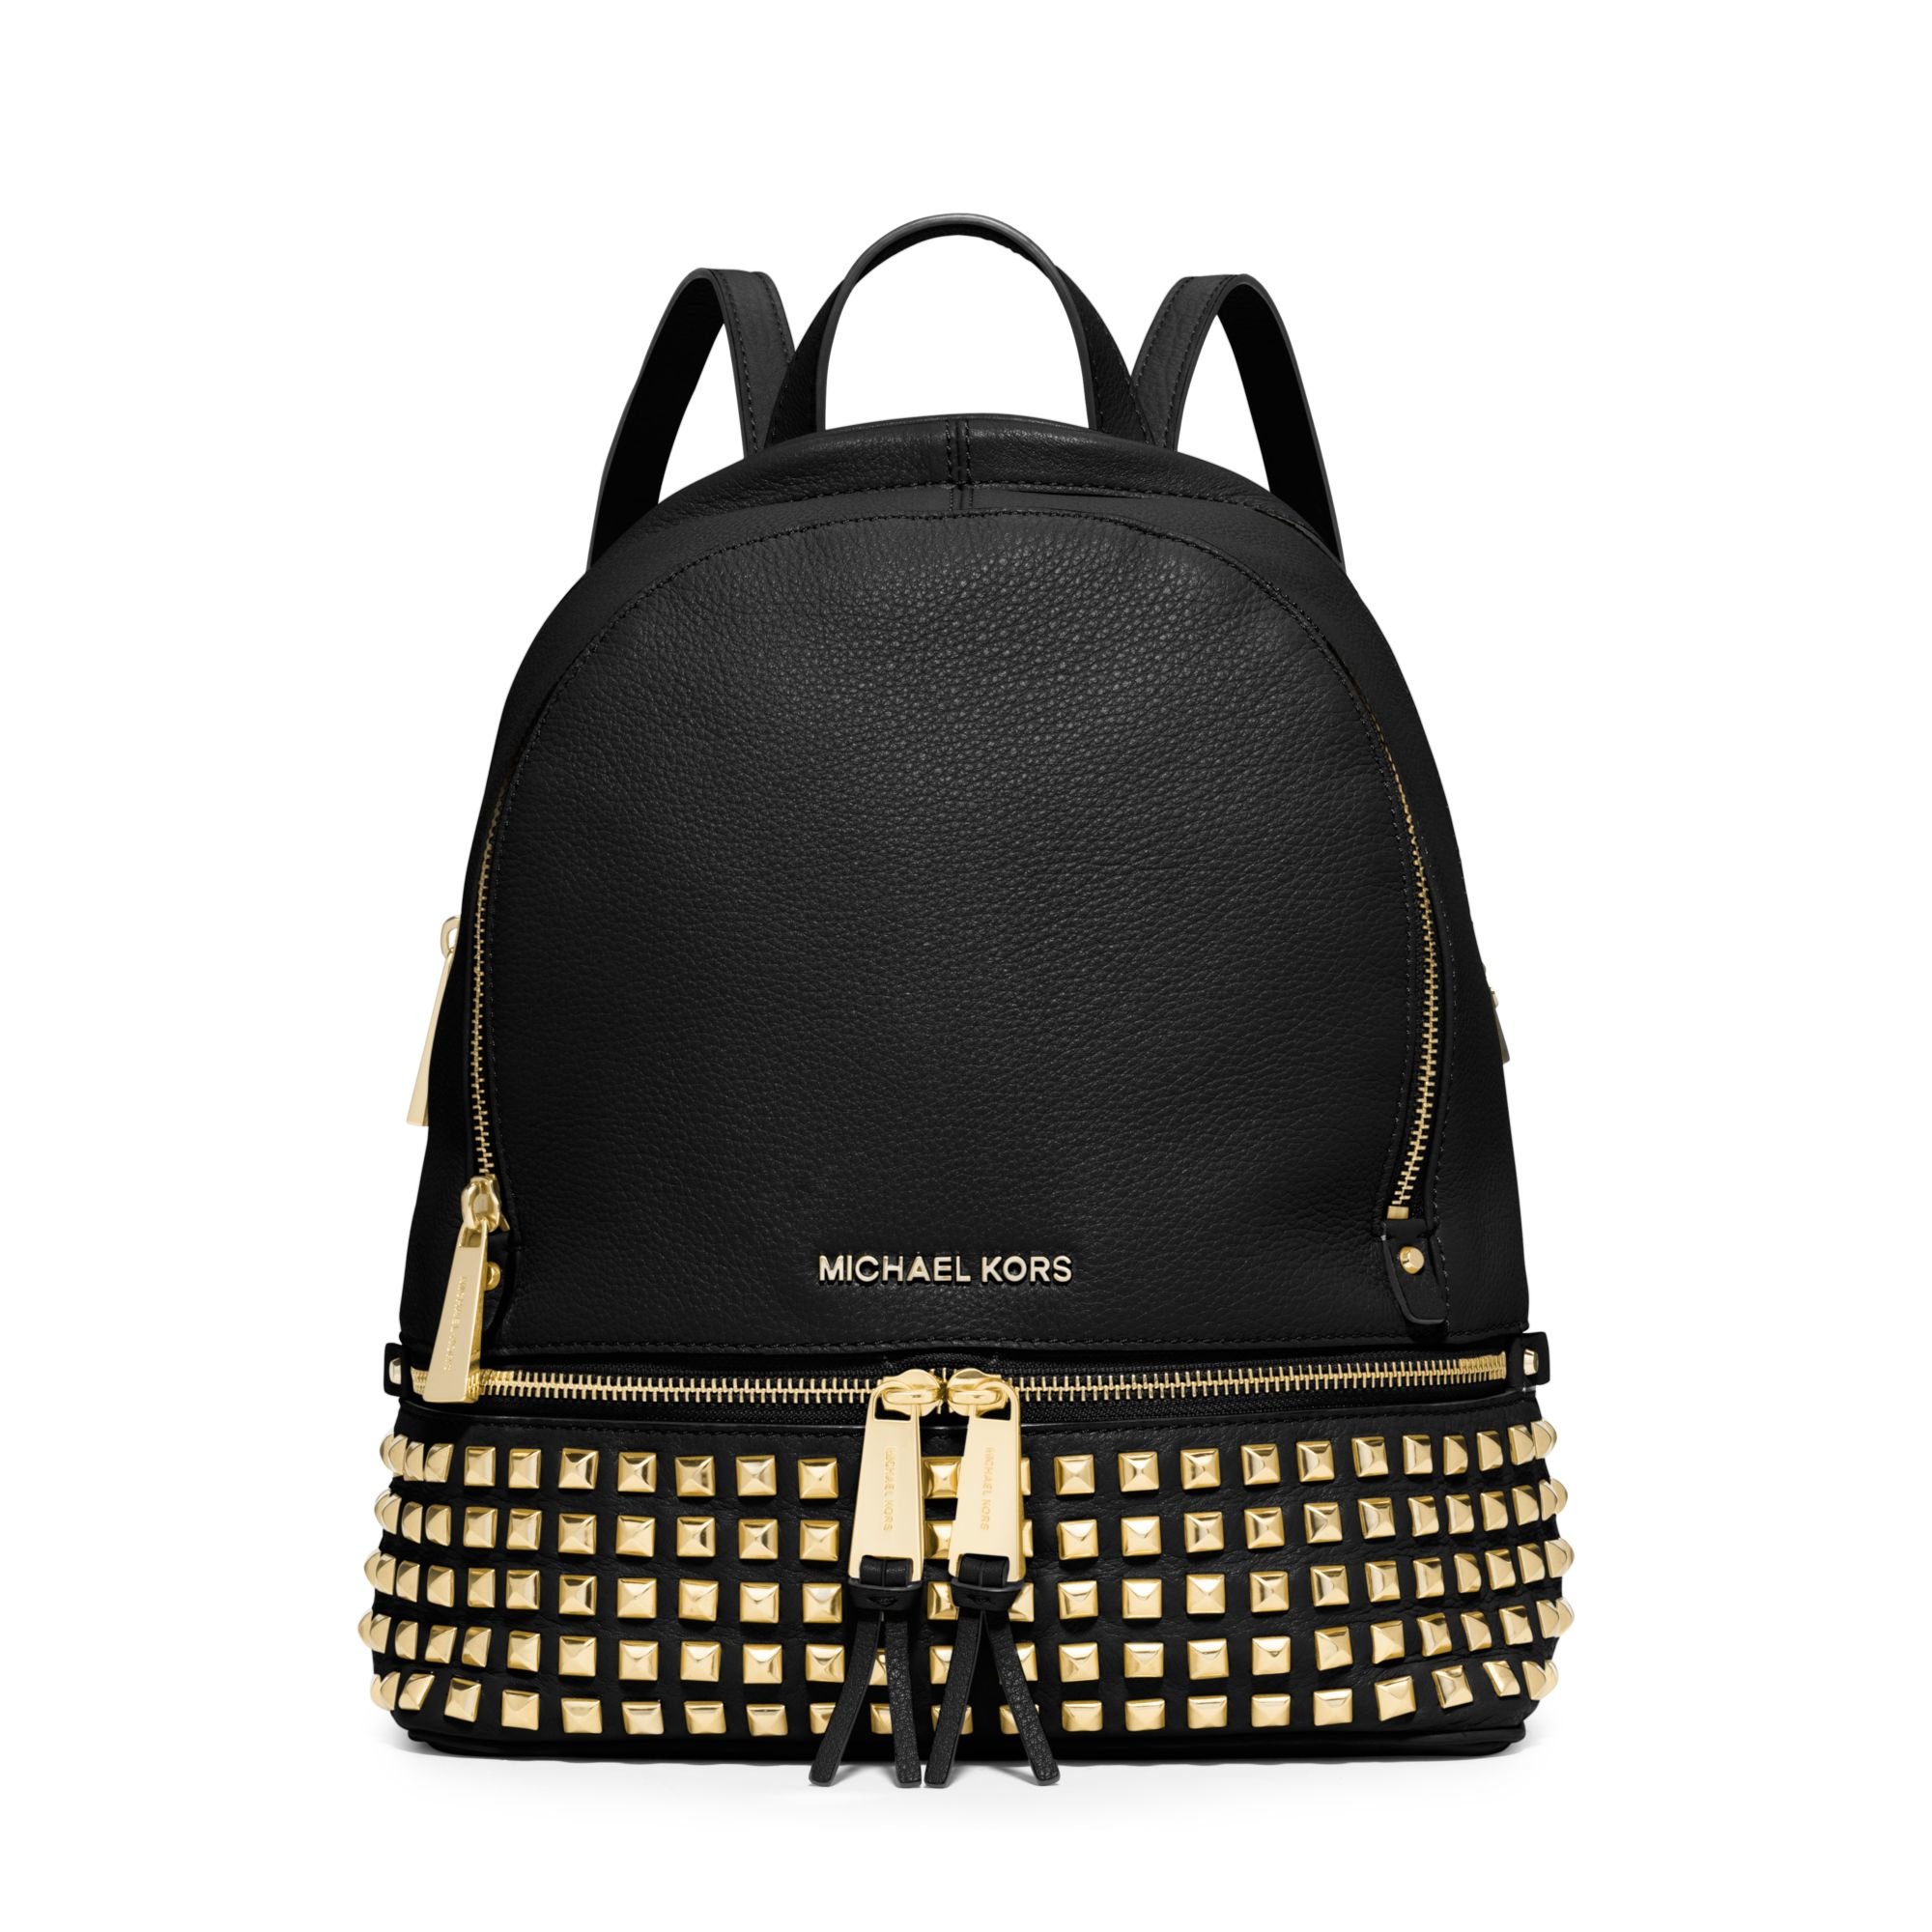 Michael kors Rhea Small Studded Leather Backpack in Black | Lyst